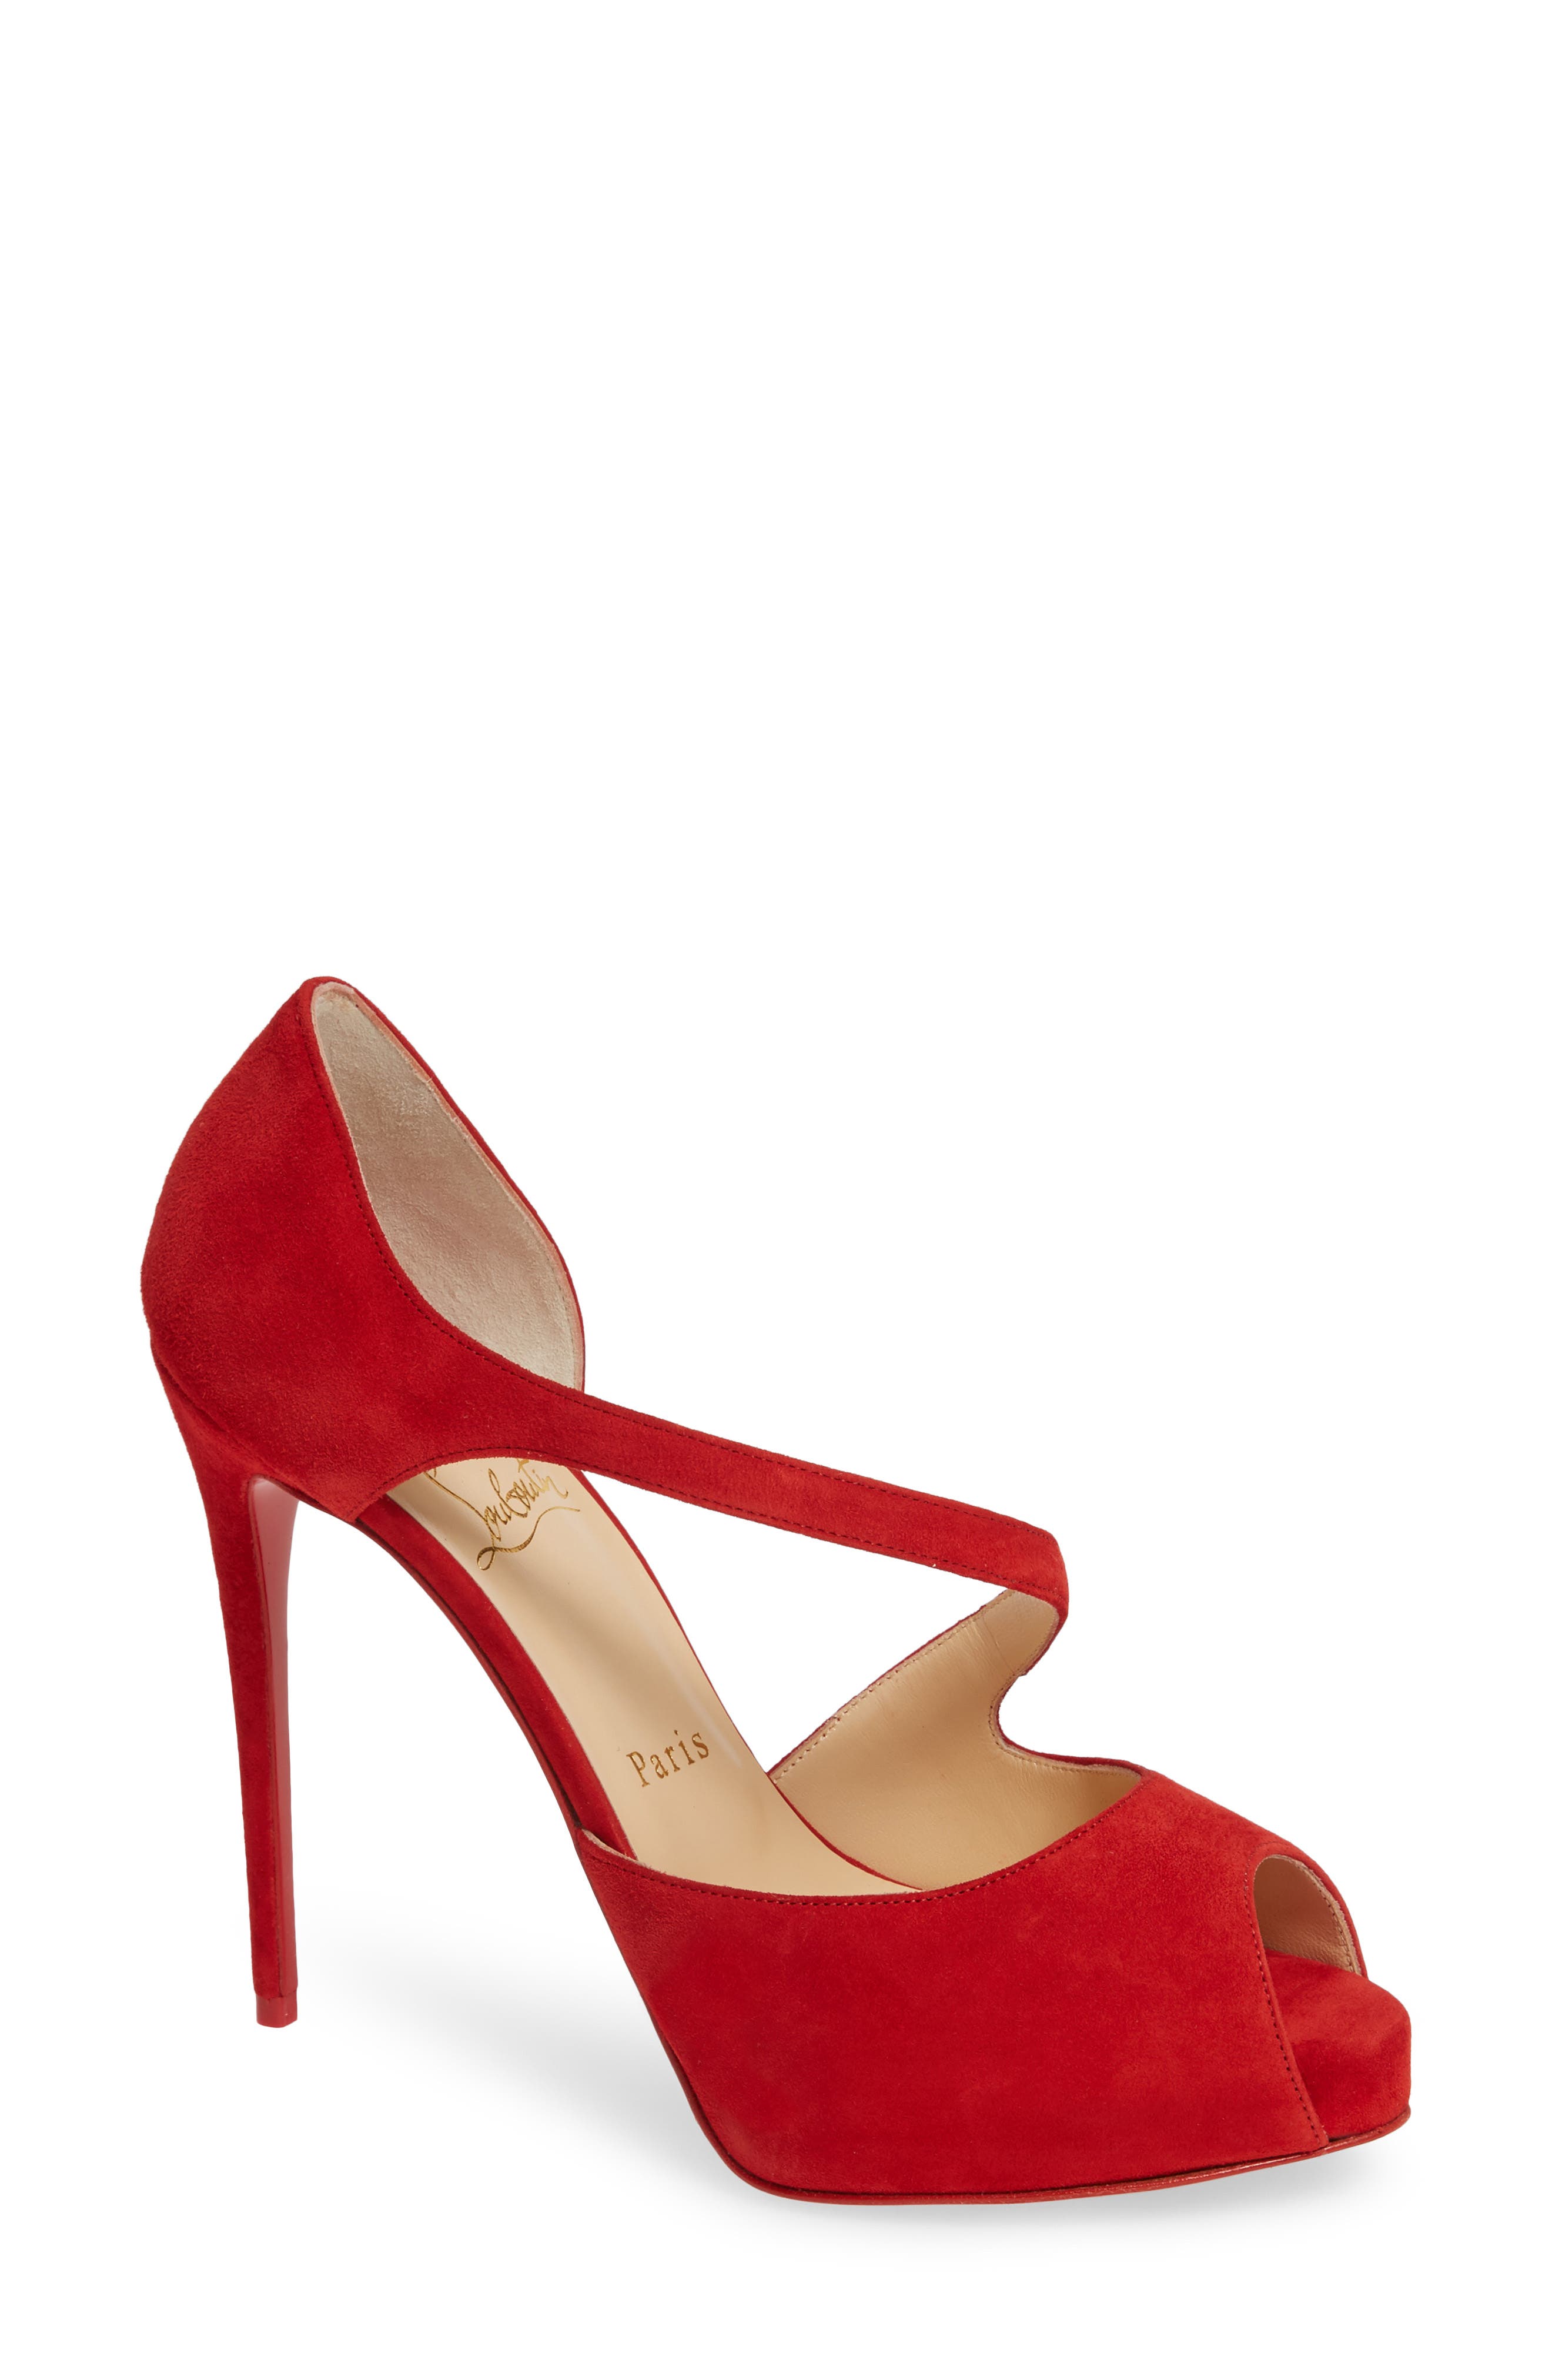 christian louboutin catchy two